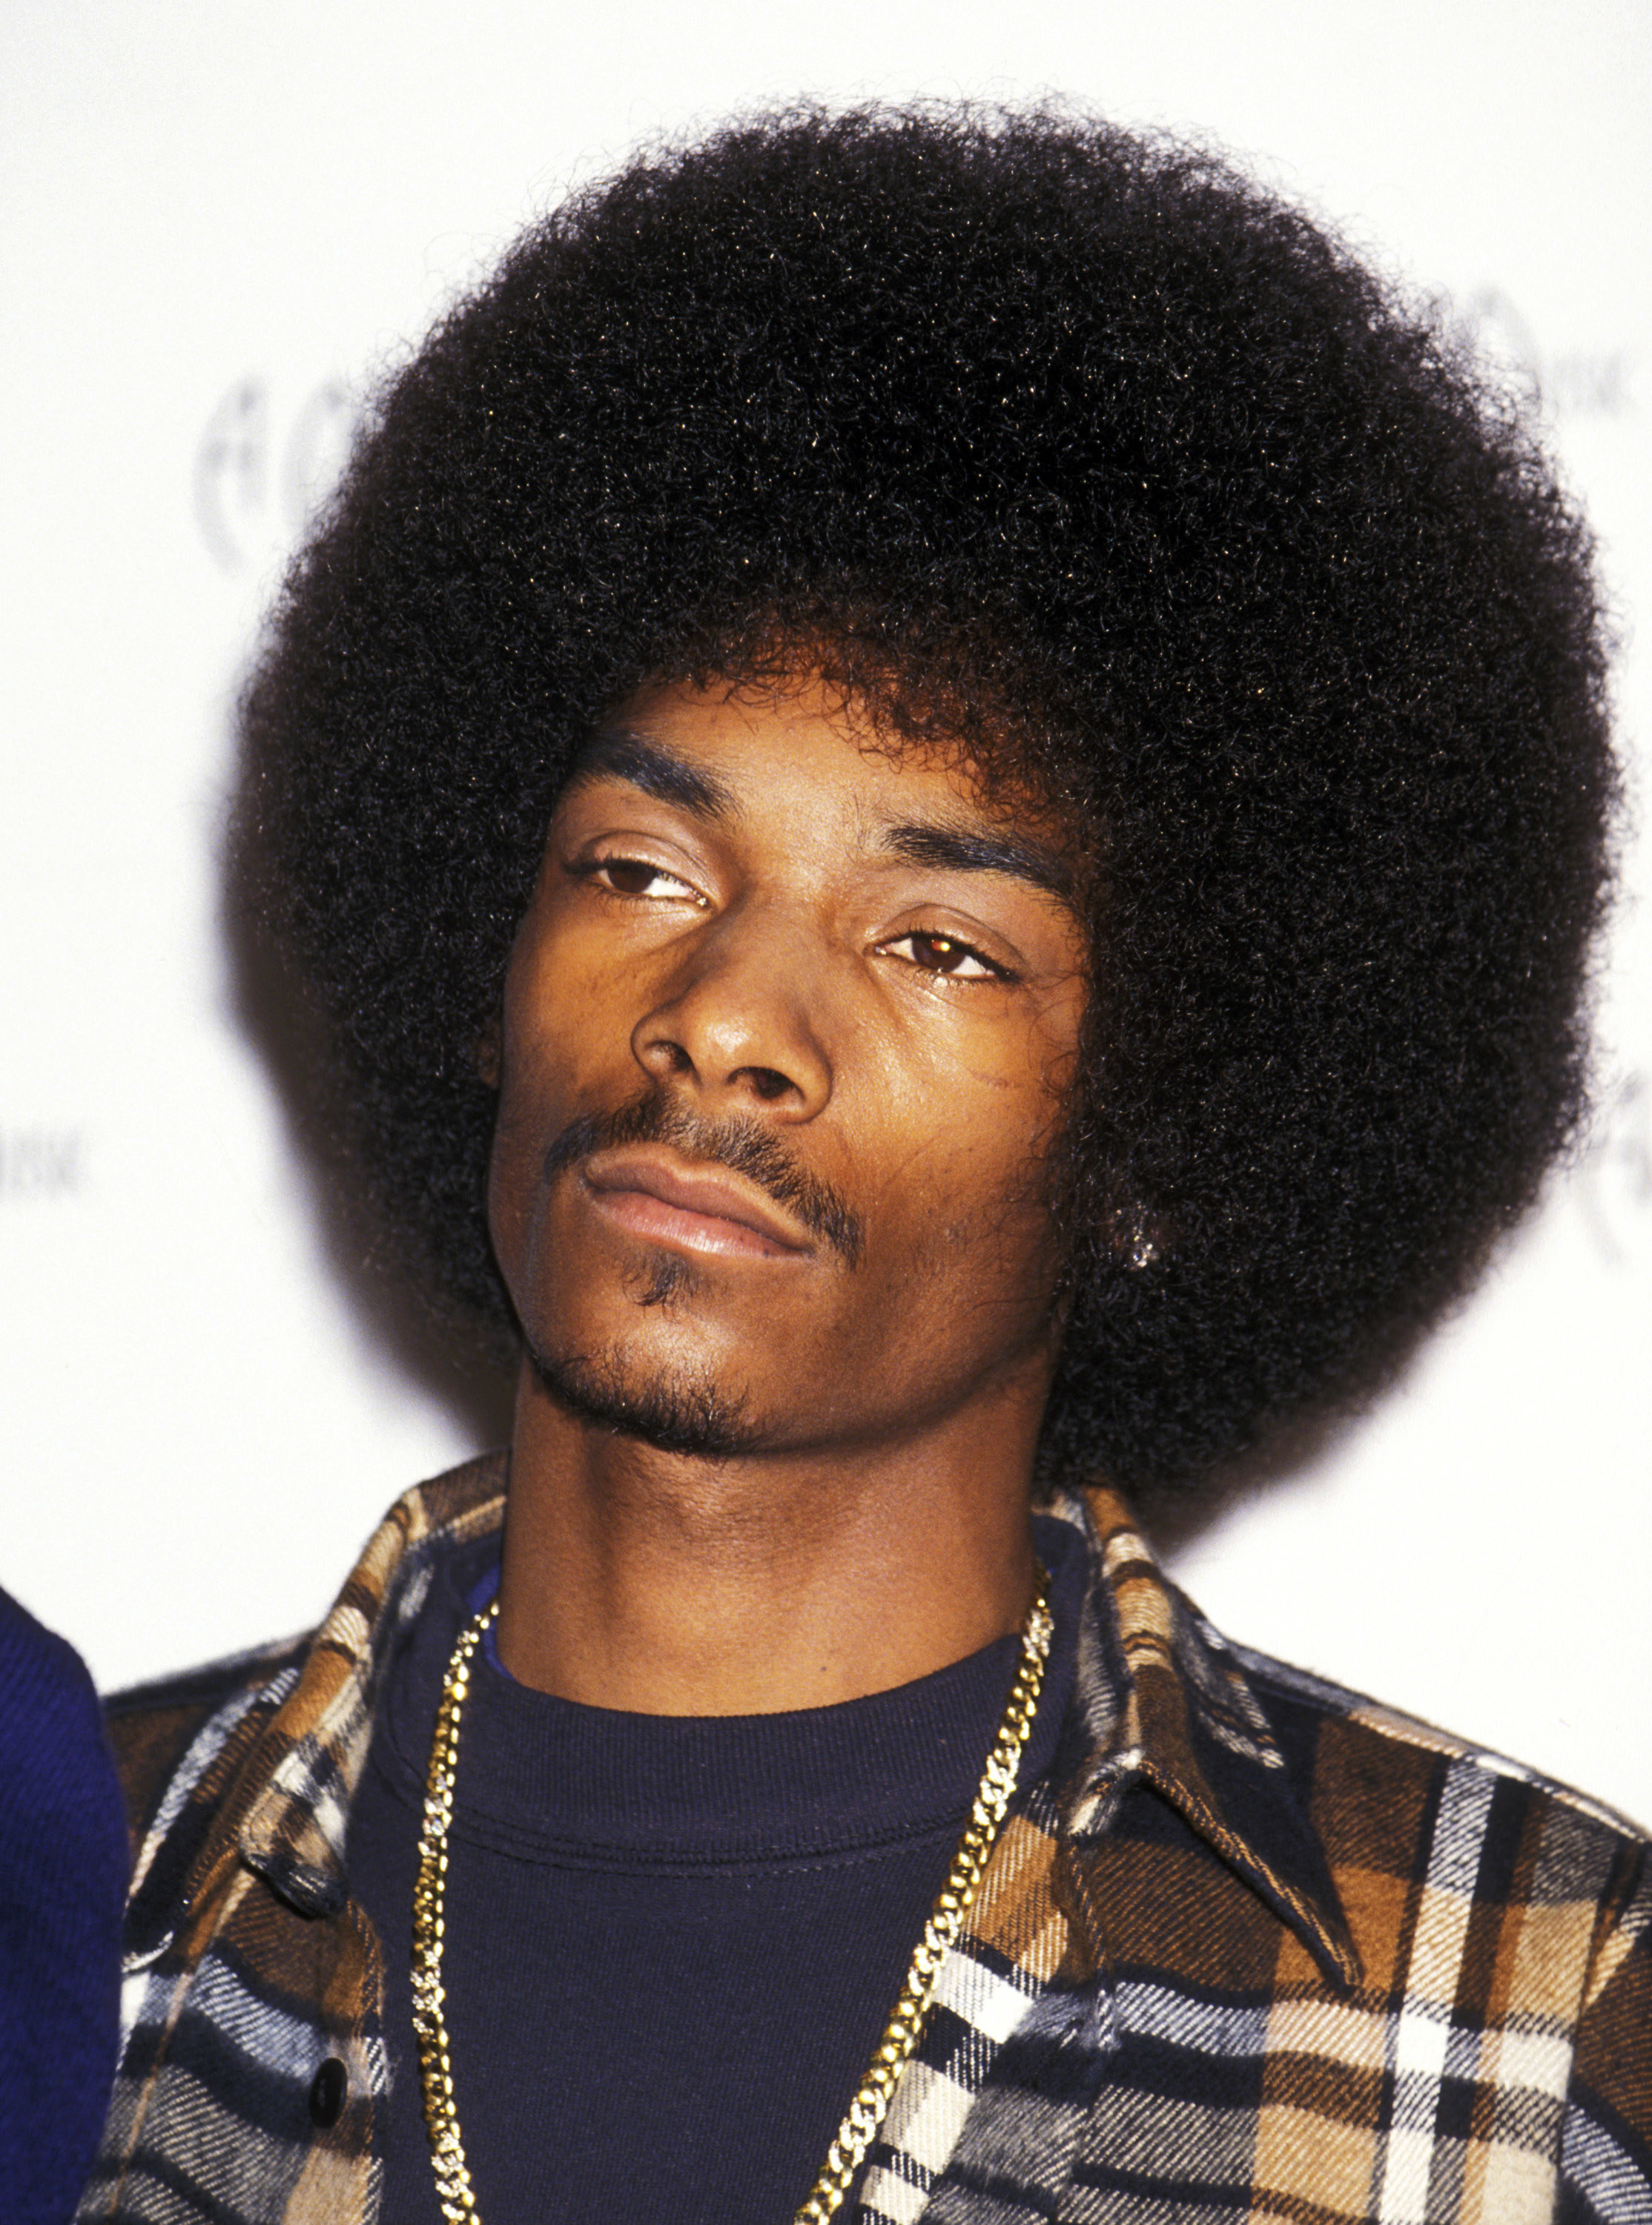 Snoop Dogg at the American Music Awards in 1994